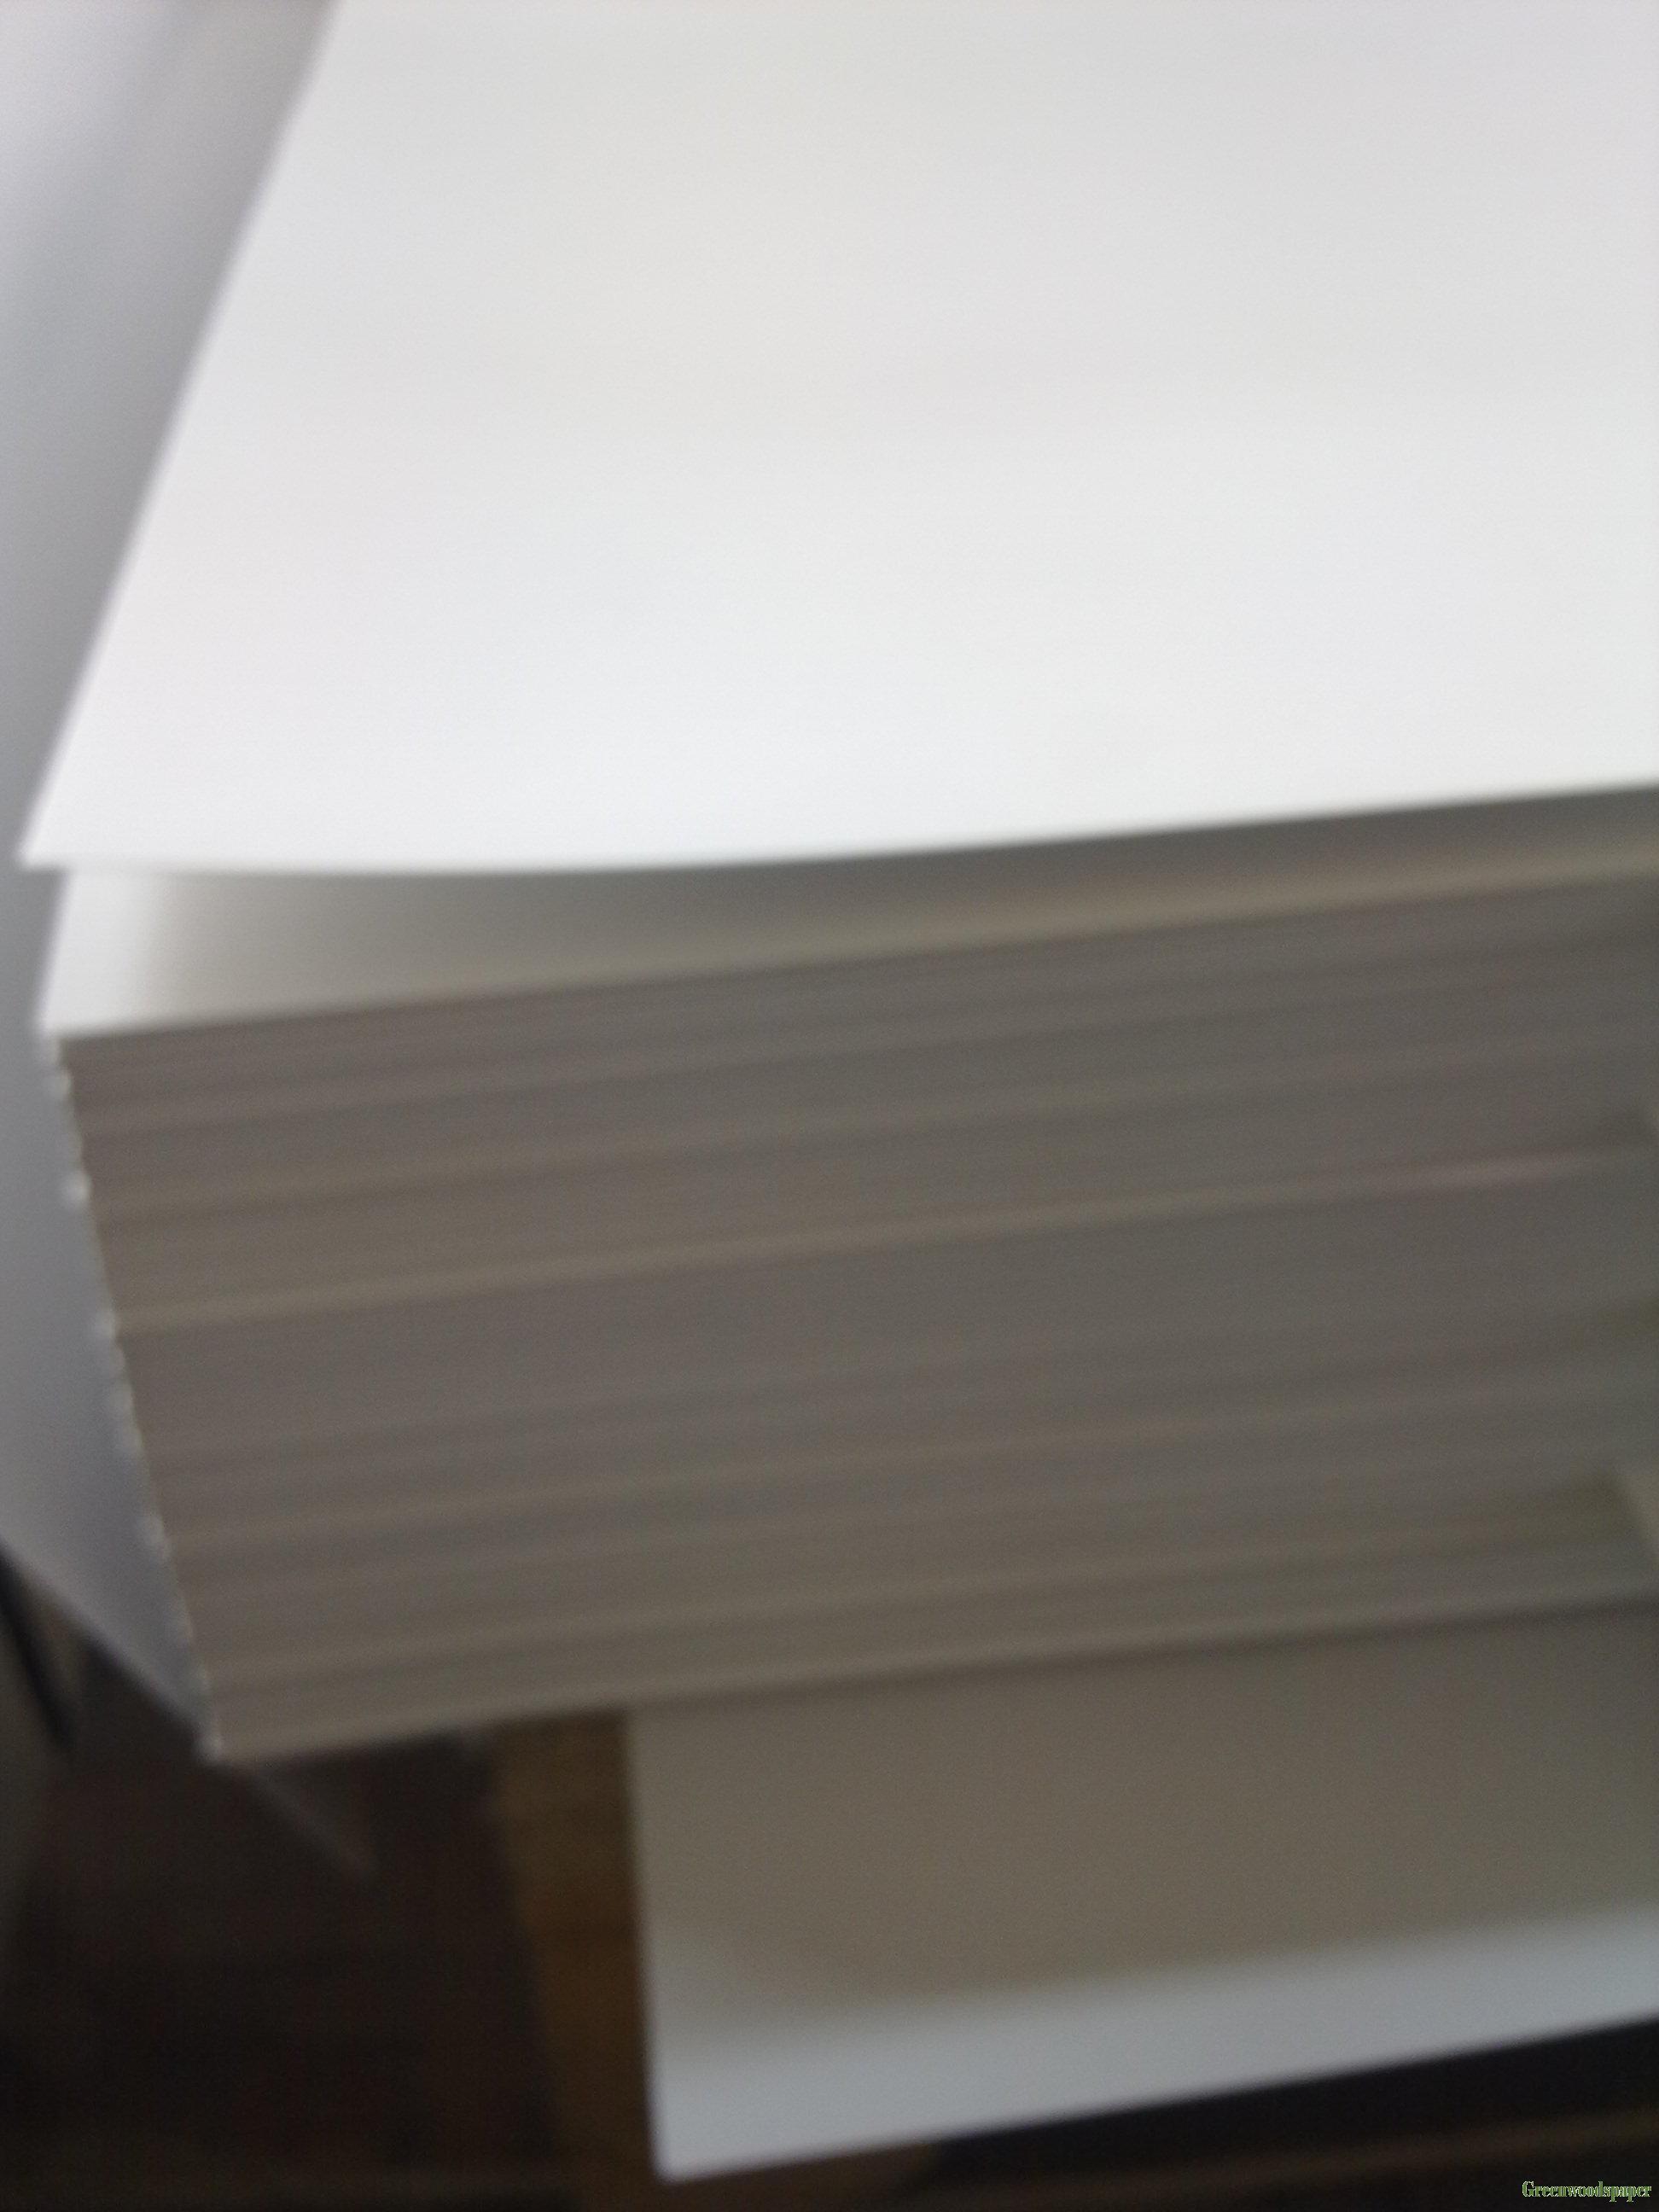 OFFSET PRINTING PAPER IN SHEETS